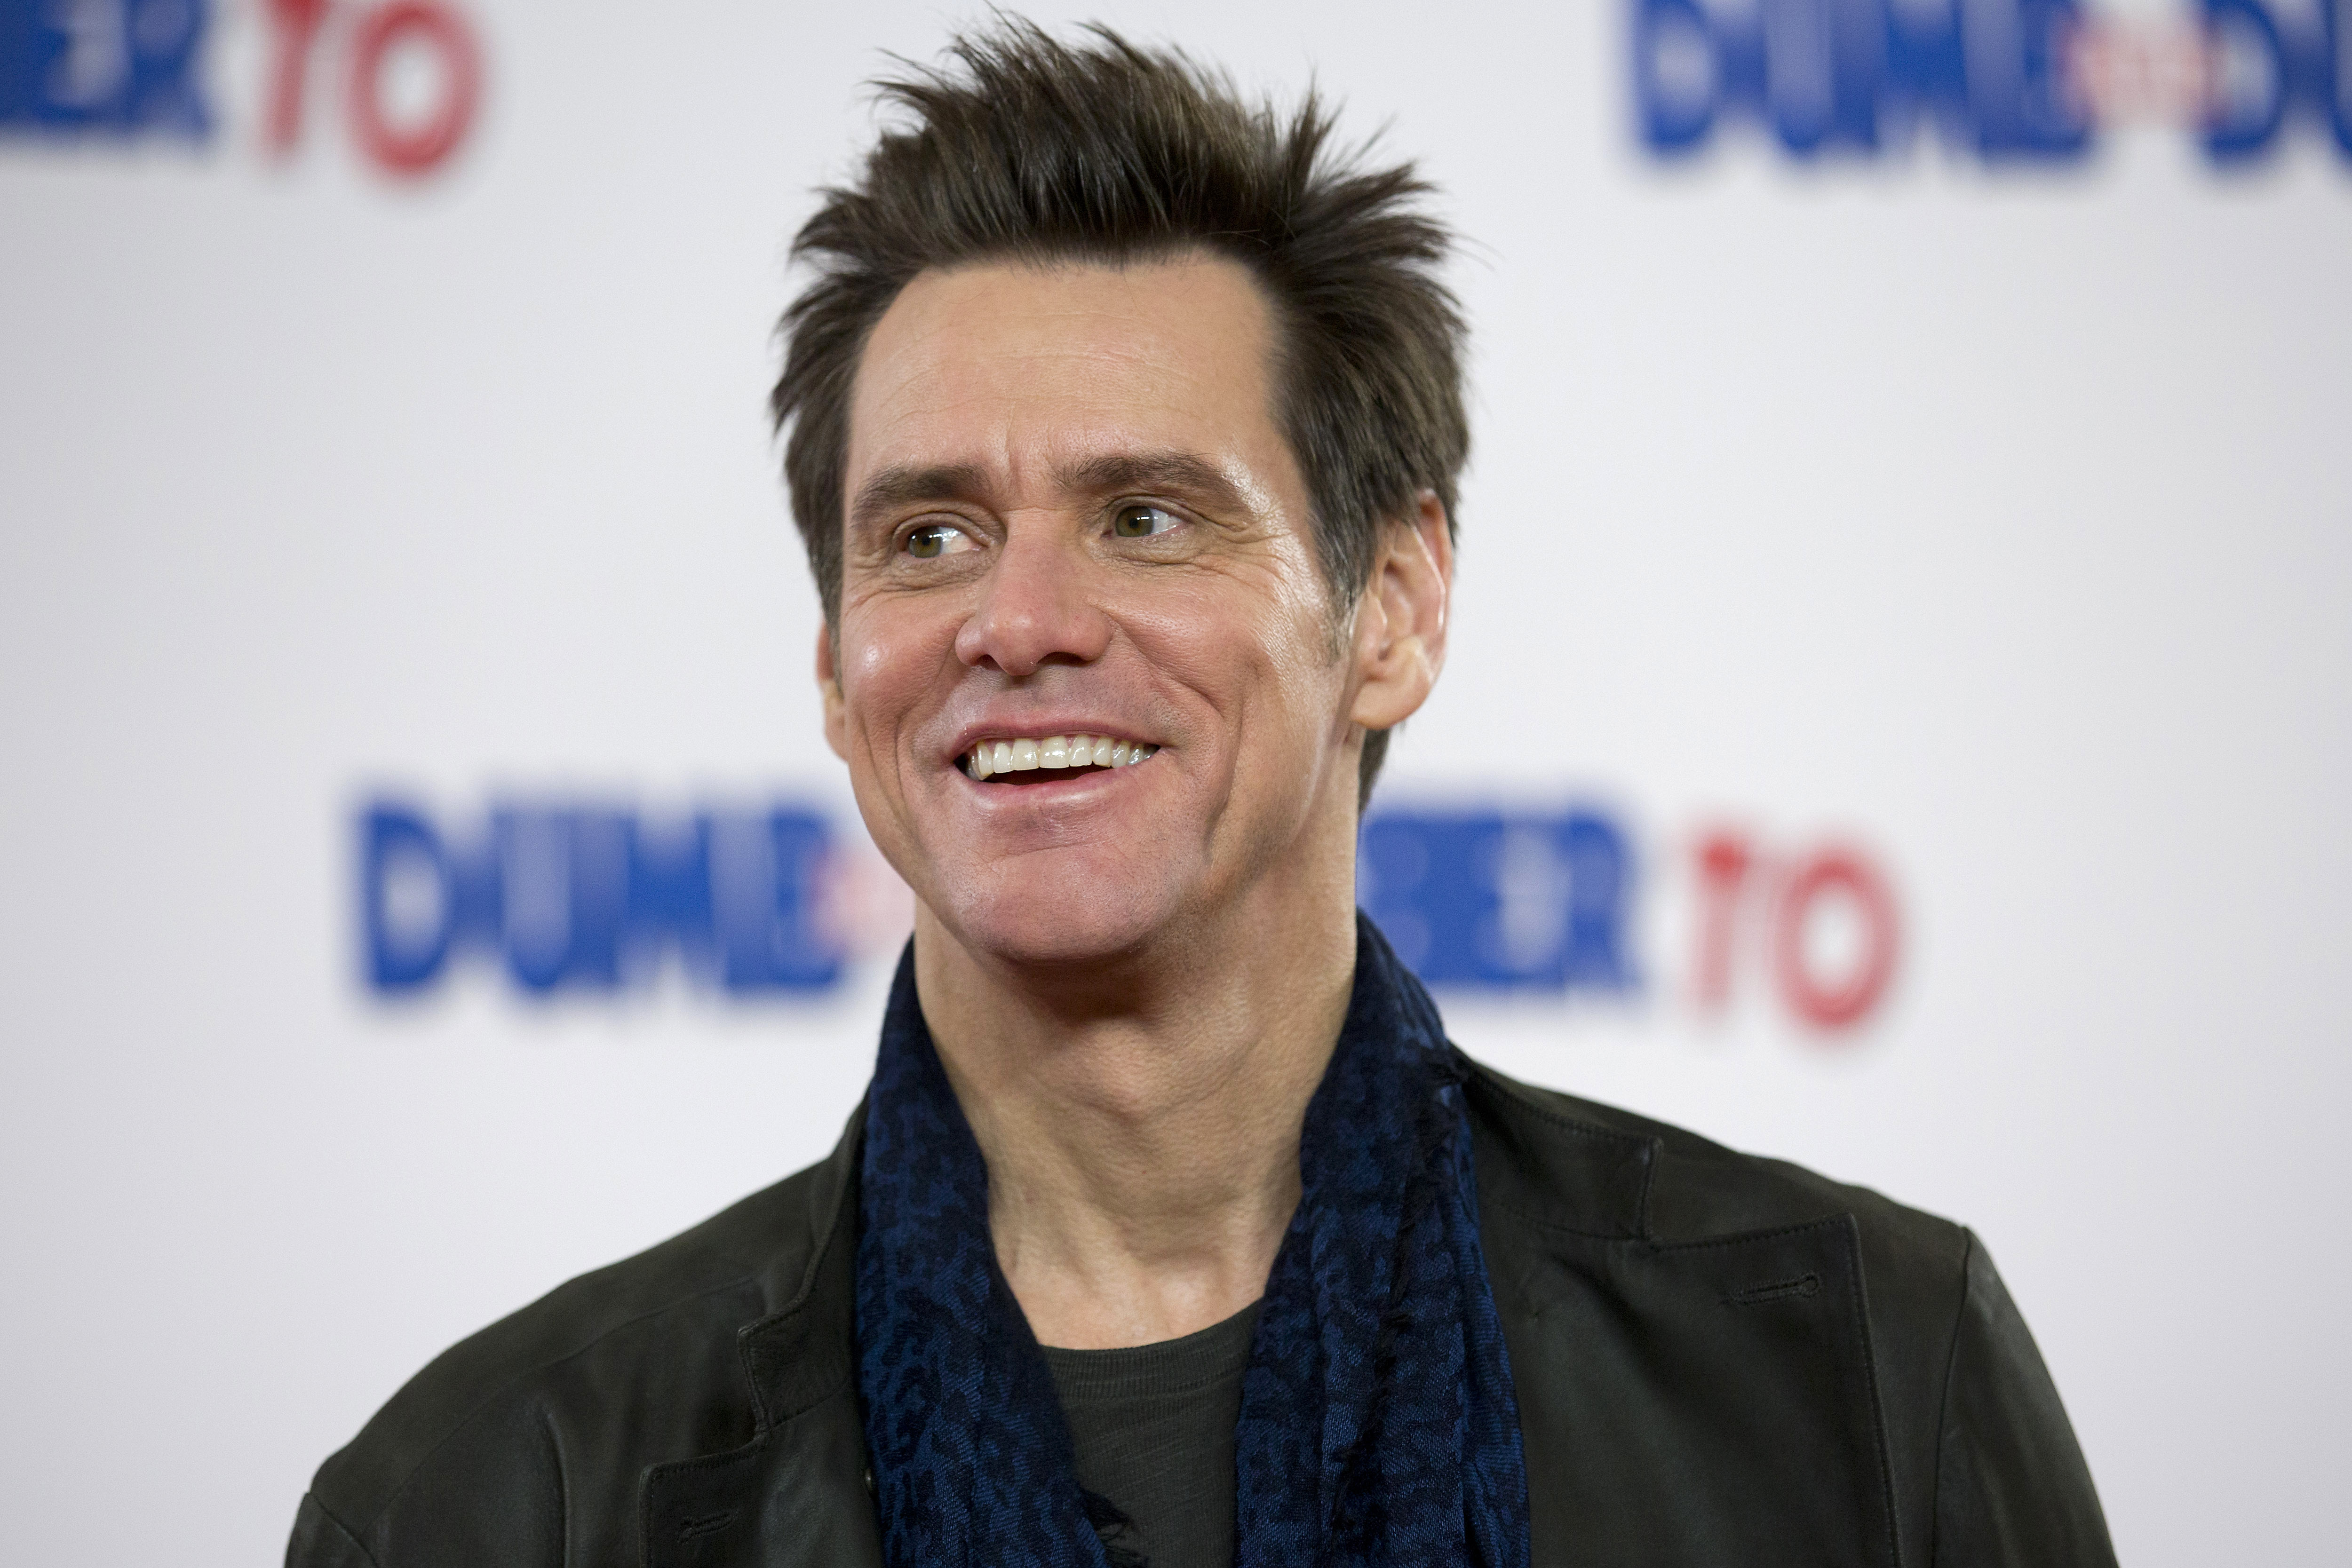 (FILES) This file photo taken on November 20, 2014 shows US actor Jim Carrey poses for photographers at a photocall for the film "Dumb and Dumber To" in London. Veteran comic actor Jim Carrey was sued September 91, 2016 for allegedly procuring drugs under a bogus name for his ex-girlfriend who died of an overdose last year and then trying to hide his involvement. According to the suit filed in Los Angeles Superior Court by Mark Burton, the estranged husband of Carrey's former girlfriend Cathriona White, the actor "used his immense wealth and celebrity status" to obtain opioids for White.  / AFP PHOTO / Justin TALLIS